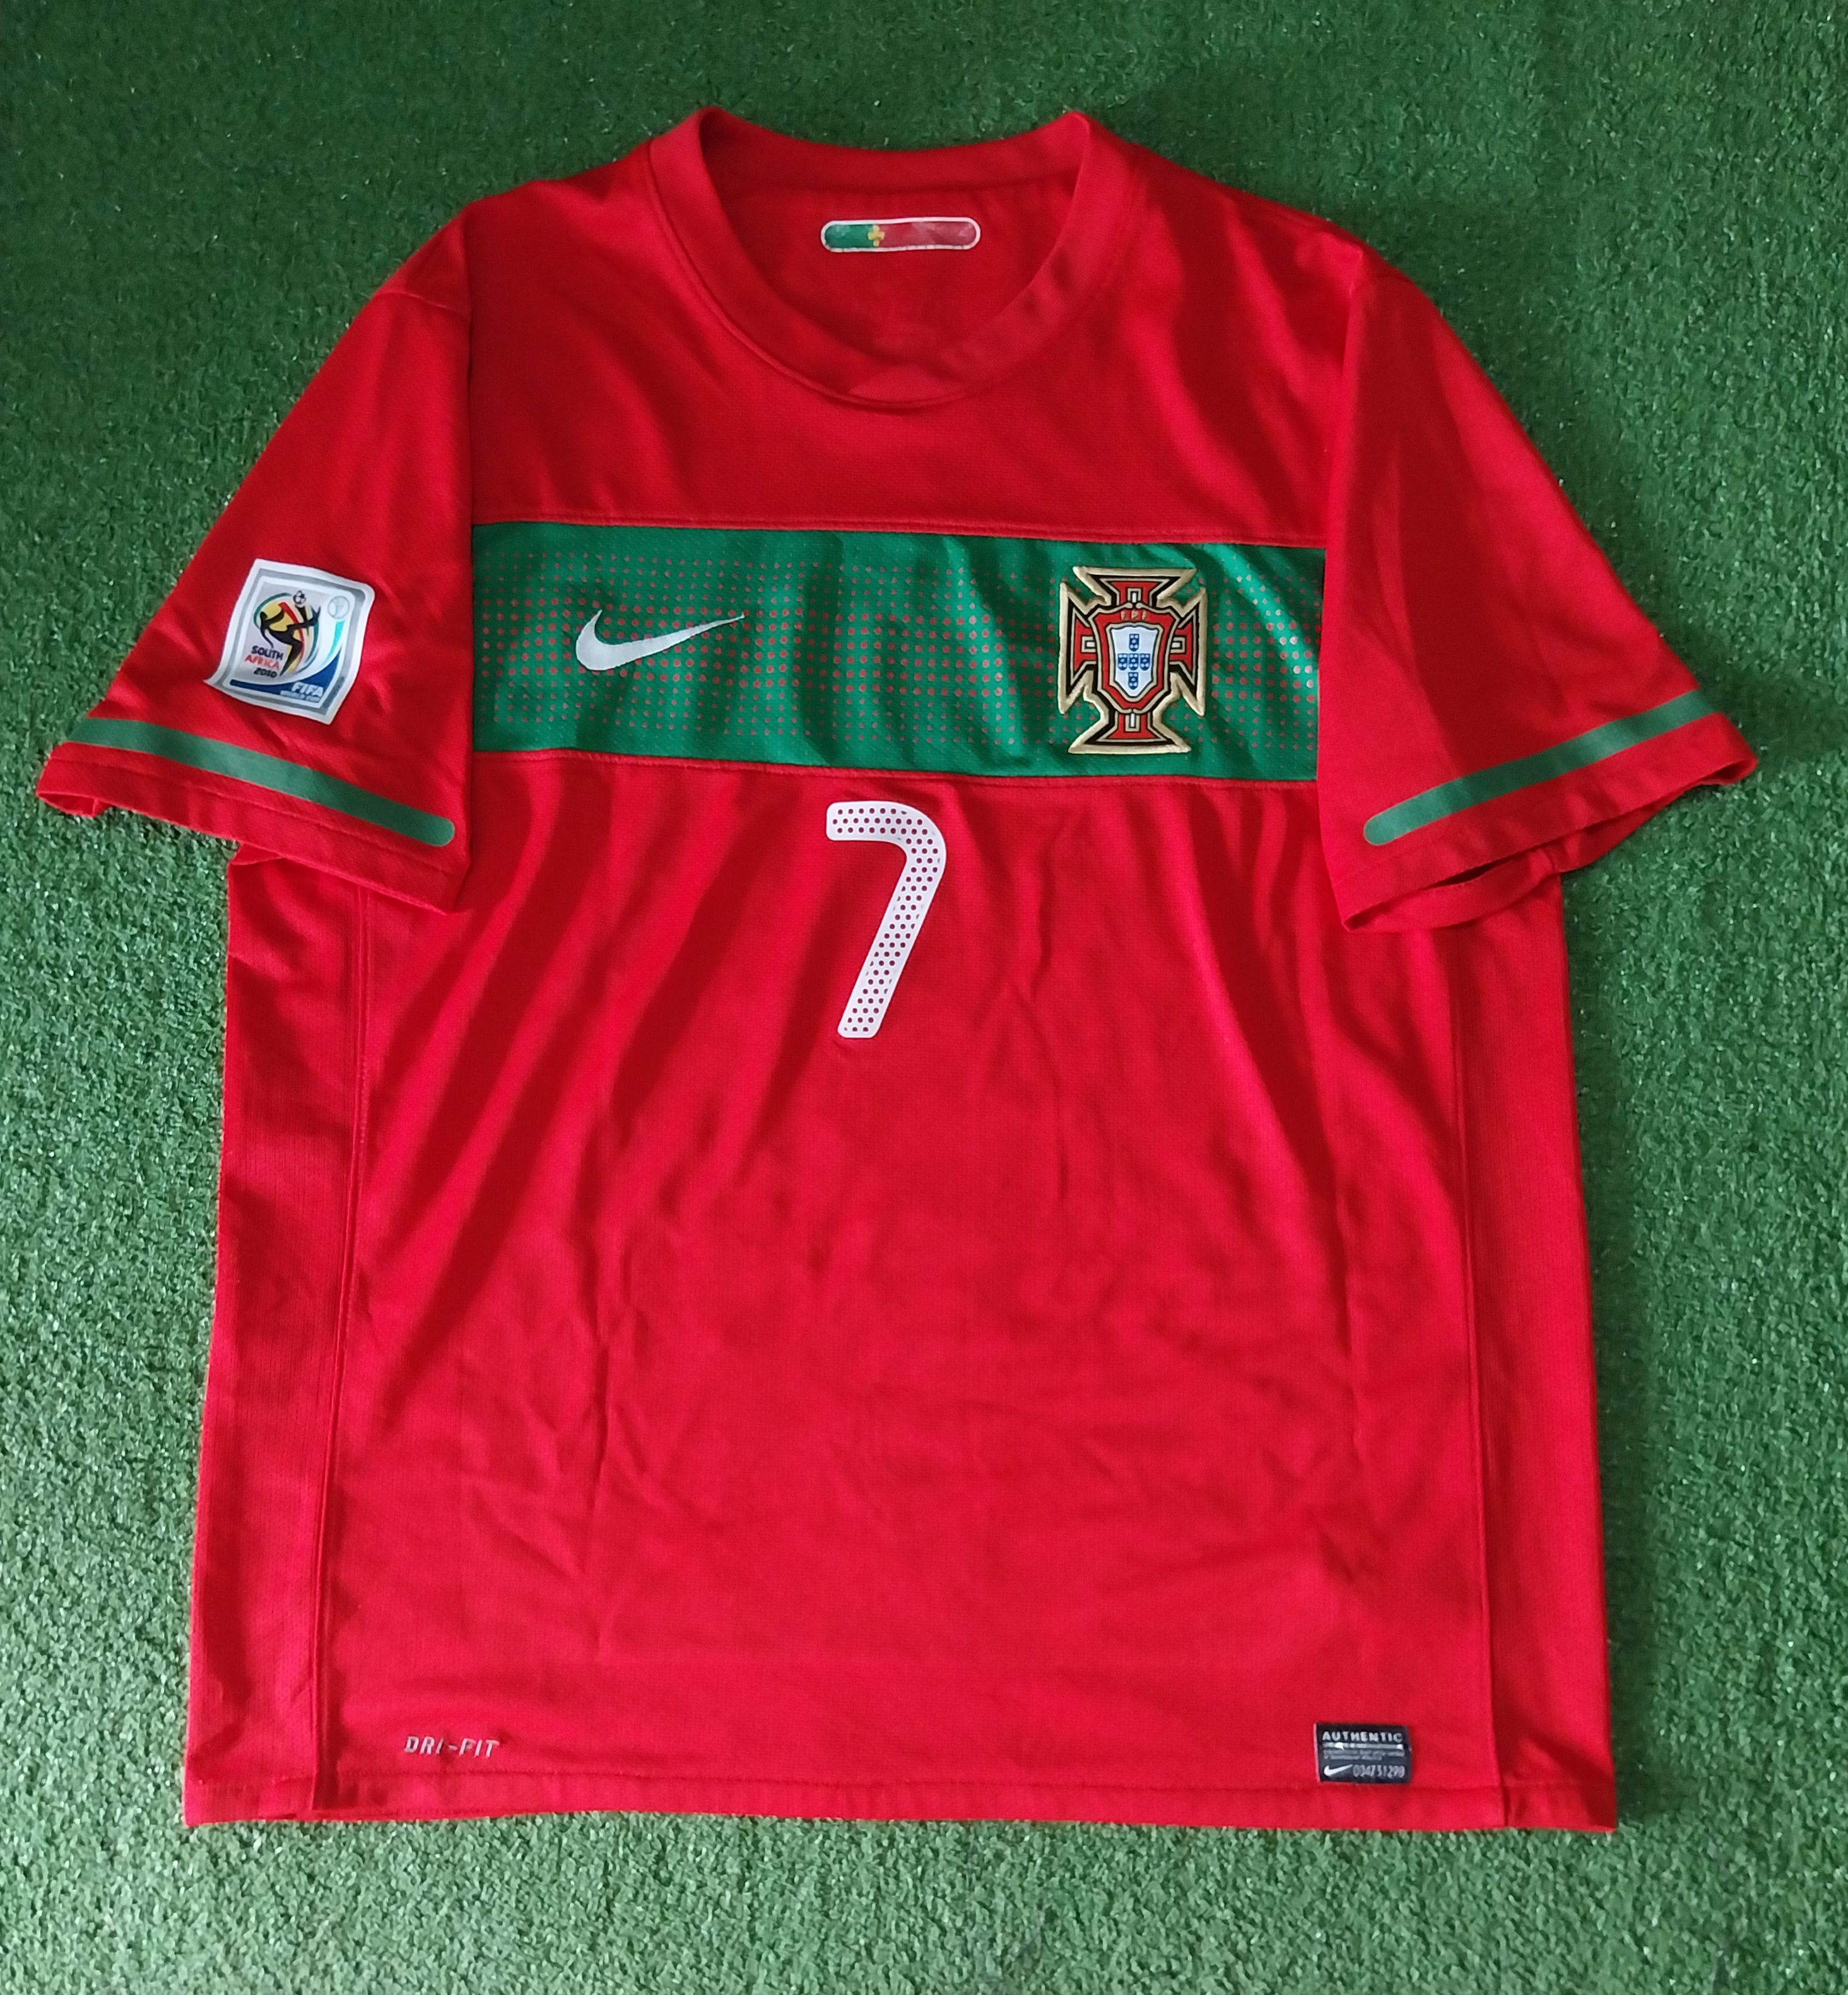 Pre-owned Nike X Soccer Jersey Portugal Home 2010 Cristiano Ronaldo Jersey Football In Red